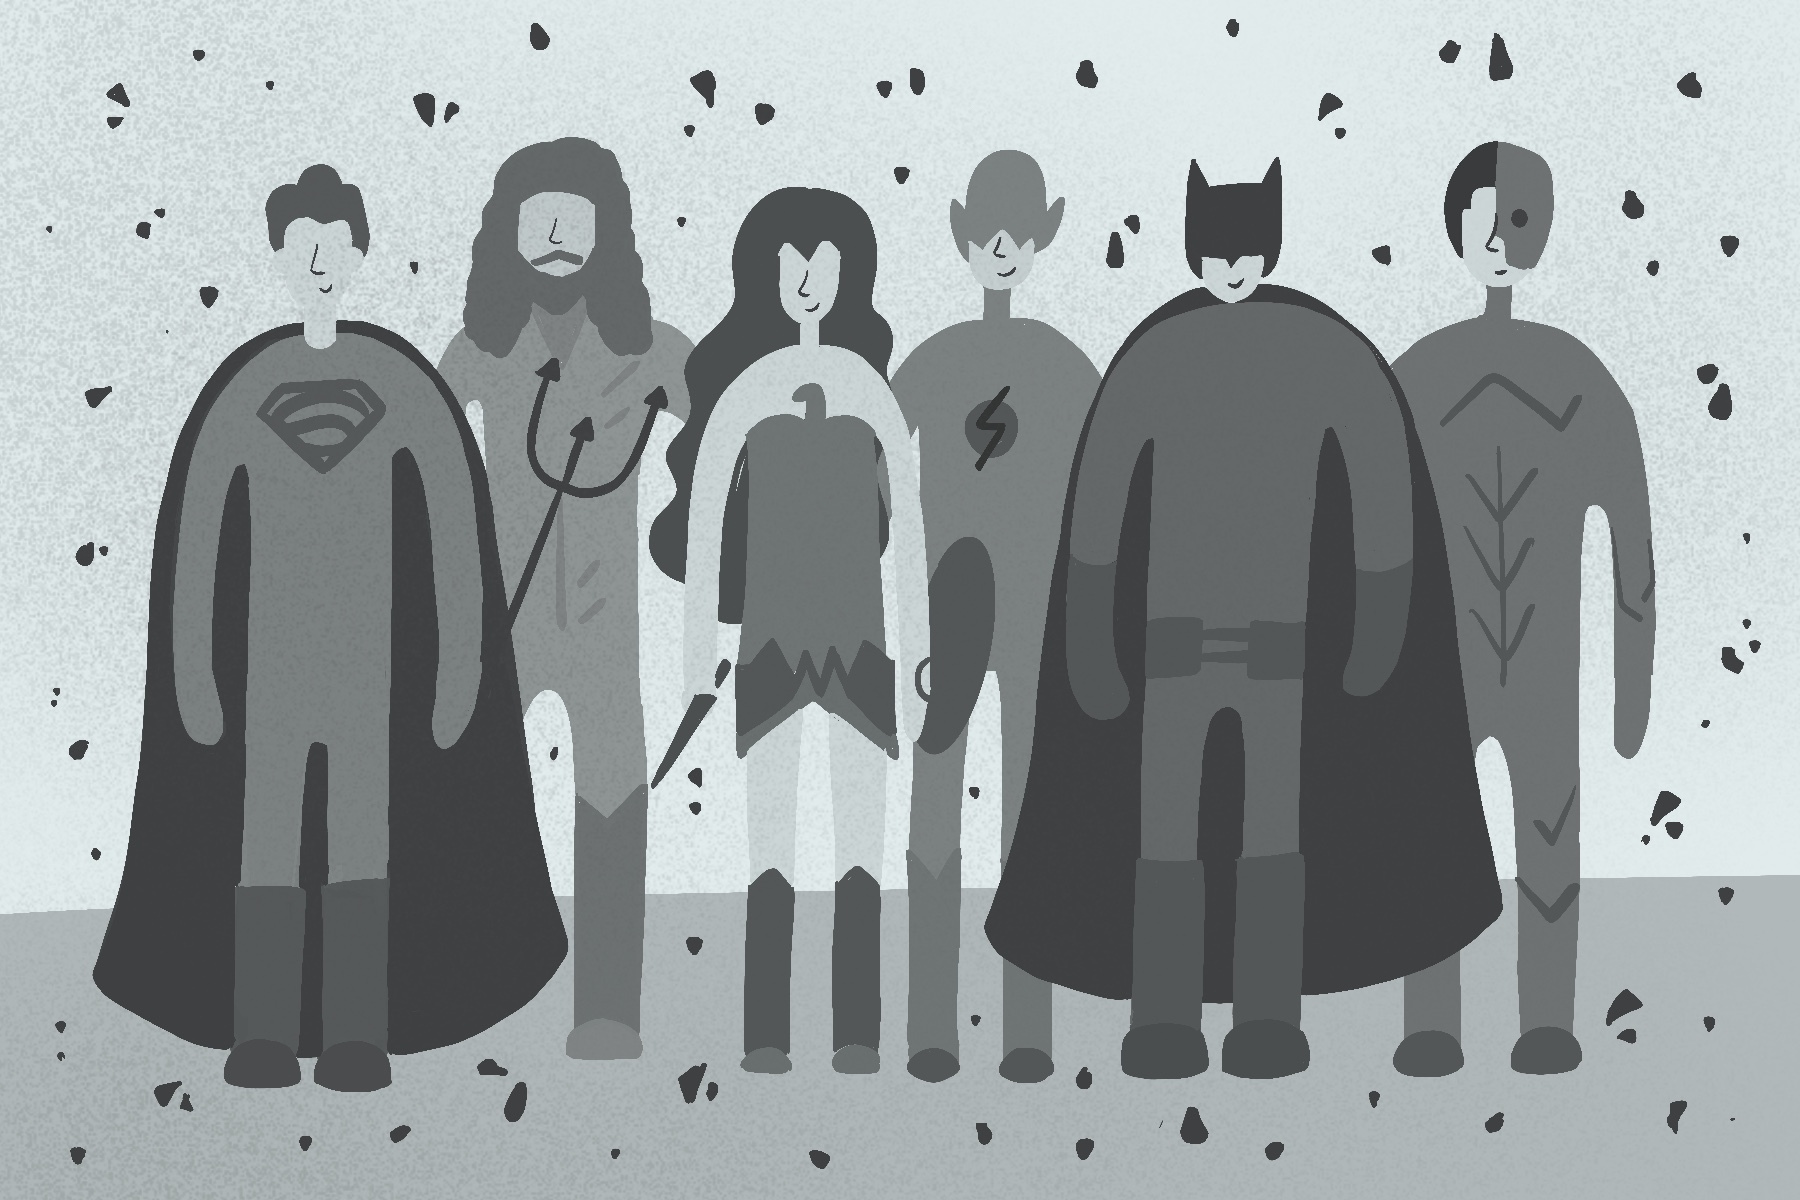 An illustration of the Justice League for an article about the recently released Snyder Cut. (Illustration by Sonja Vasiljeva, San Jose State University)